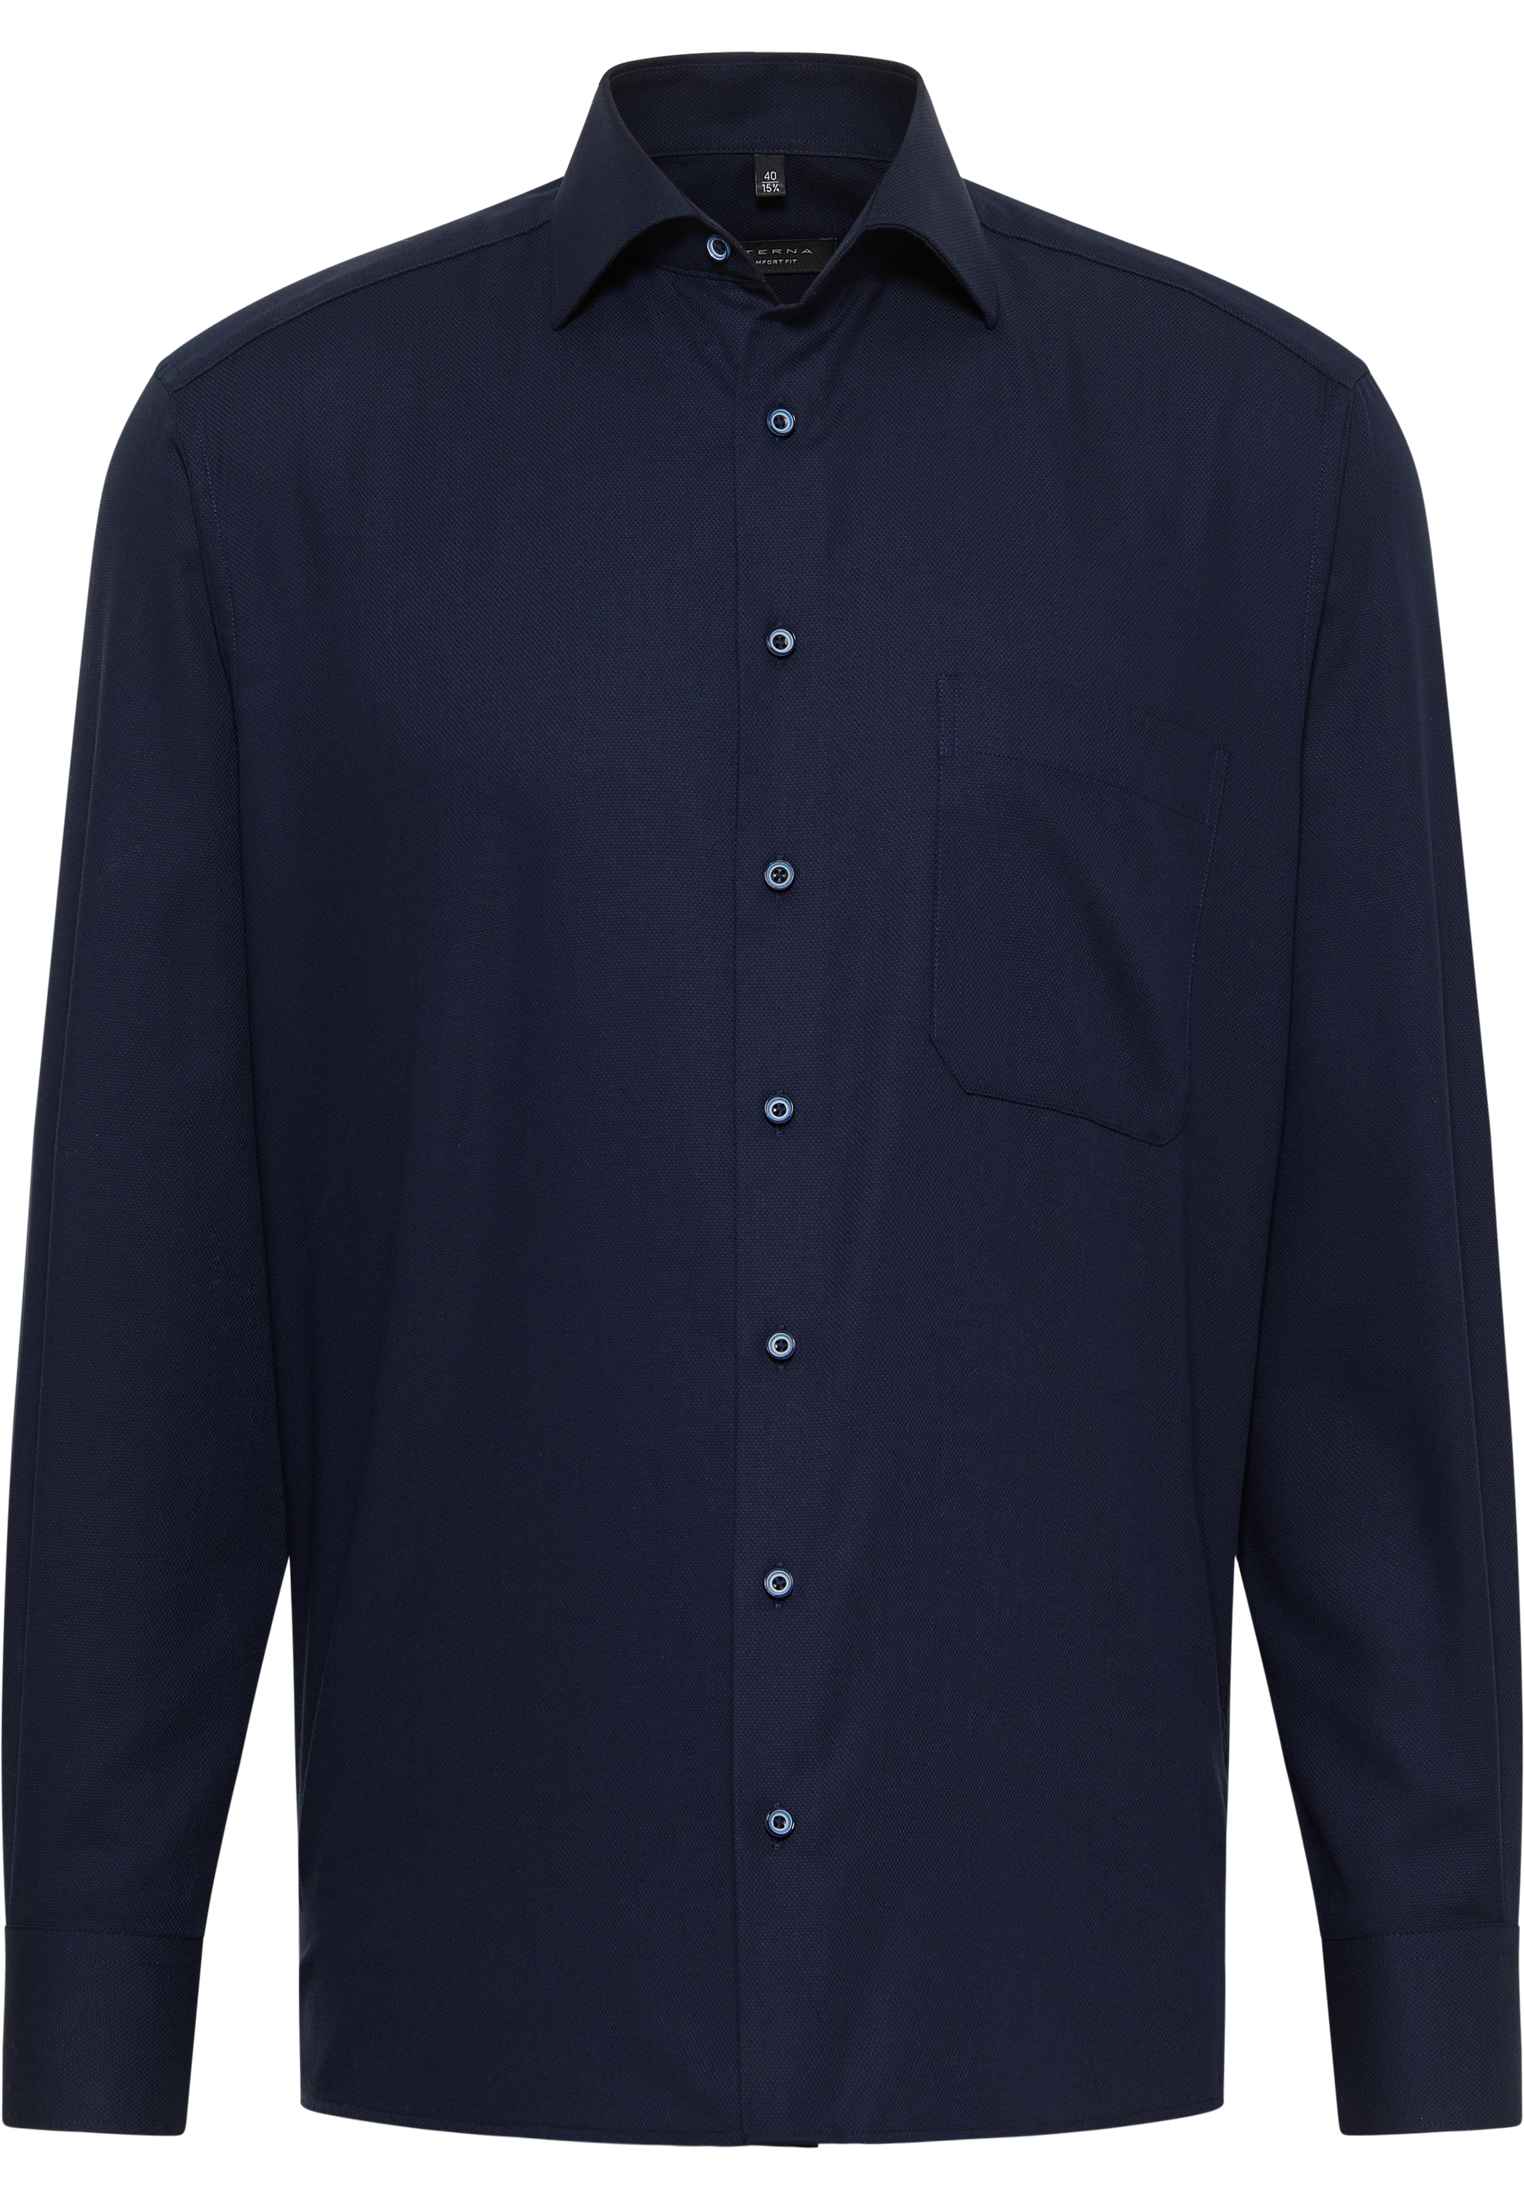 COMFORT FIT Shirt in navy structured